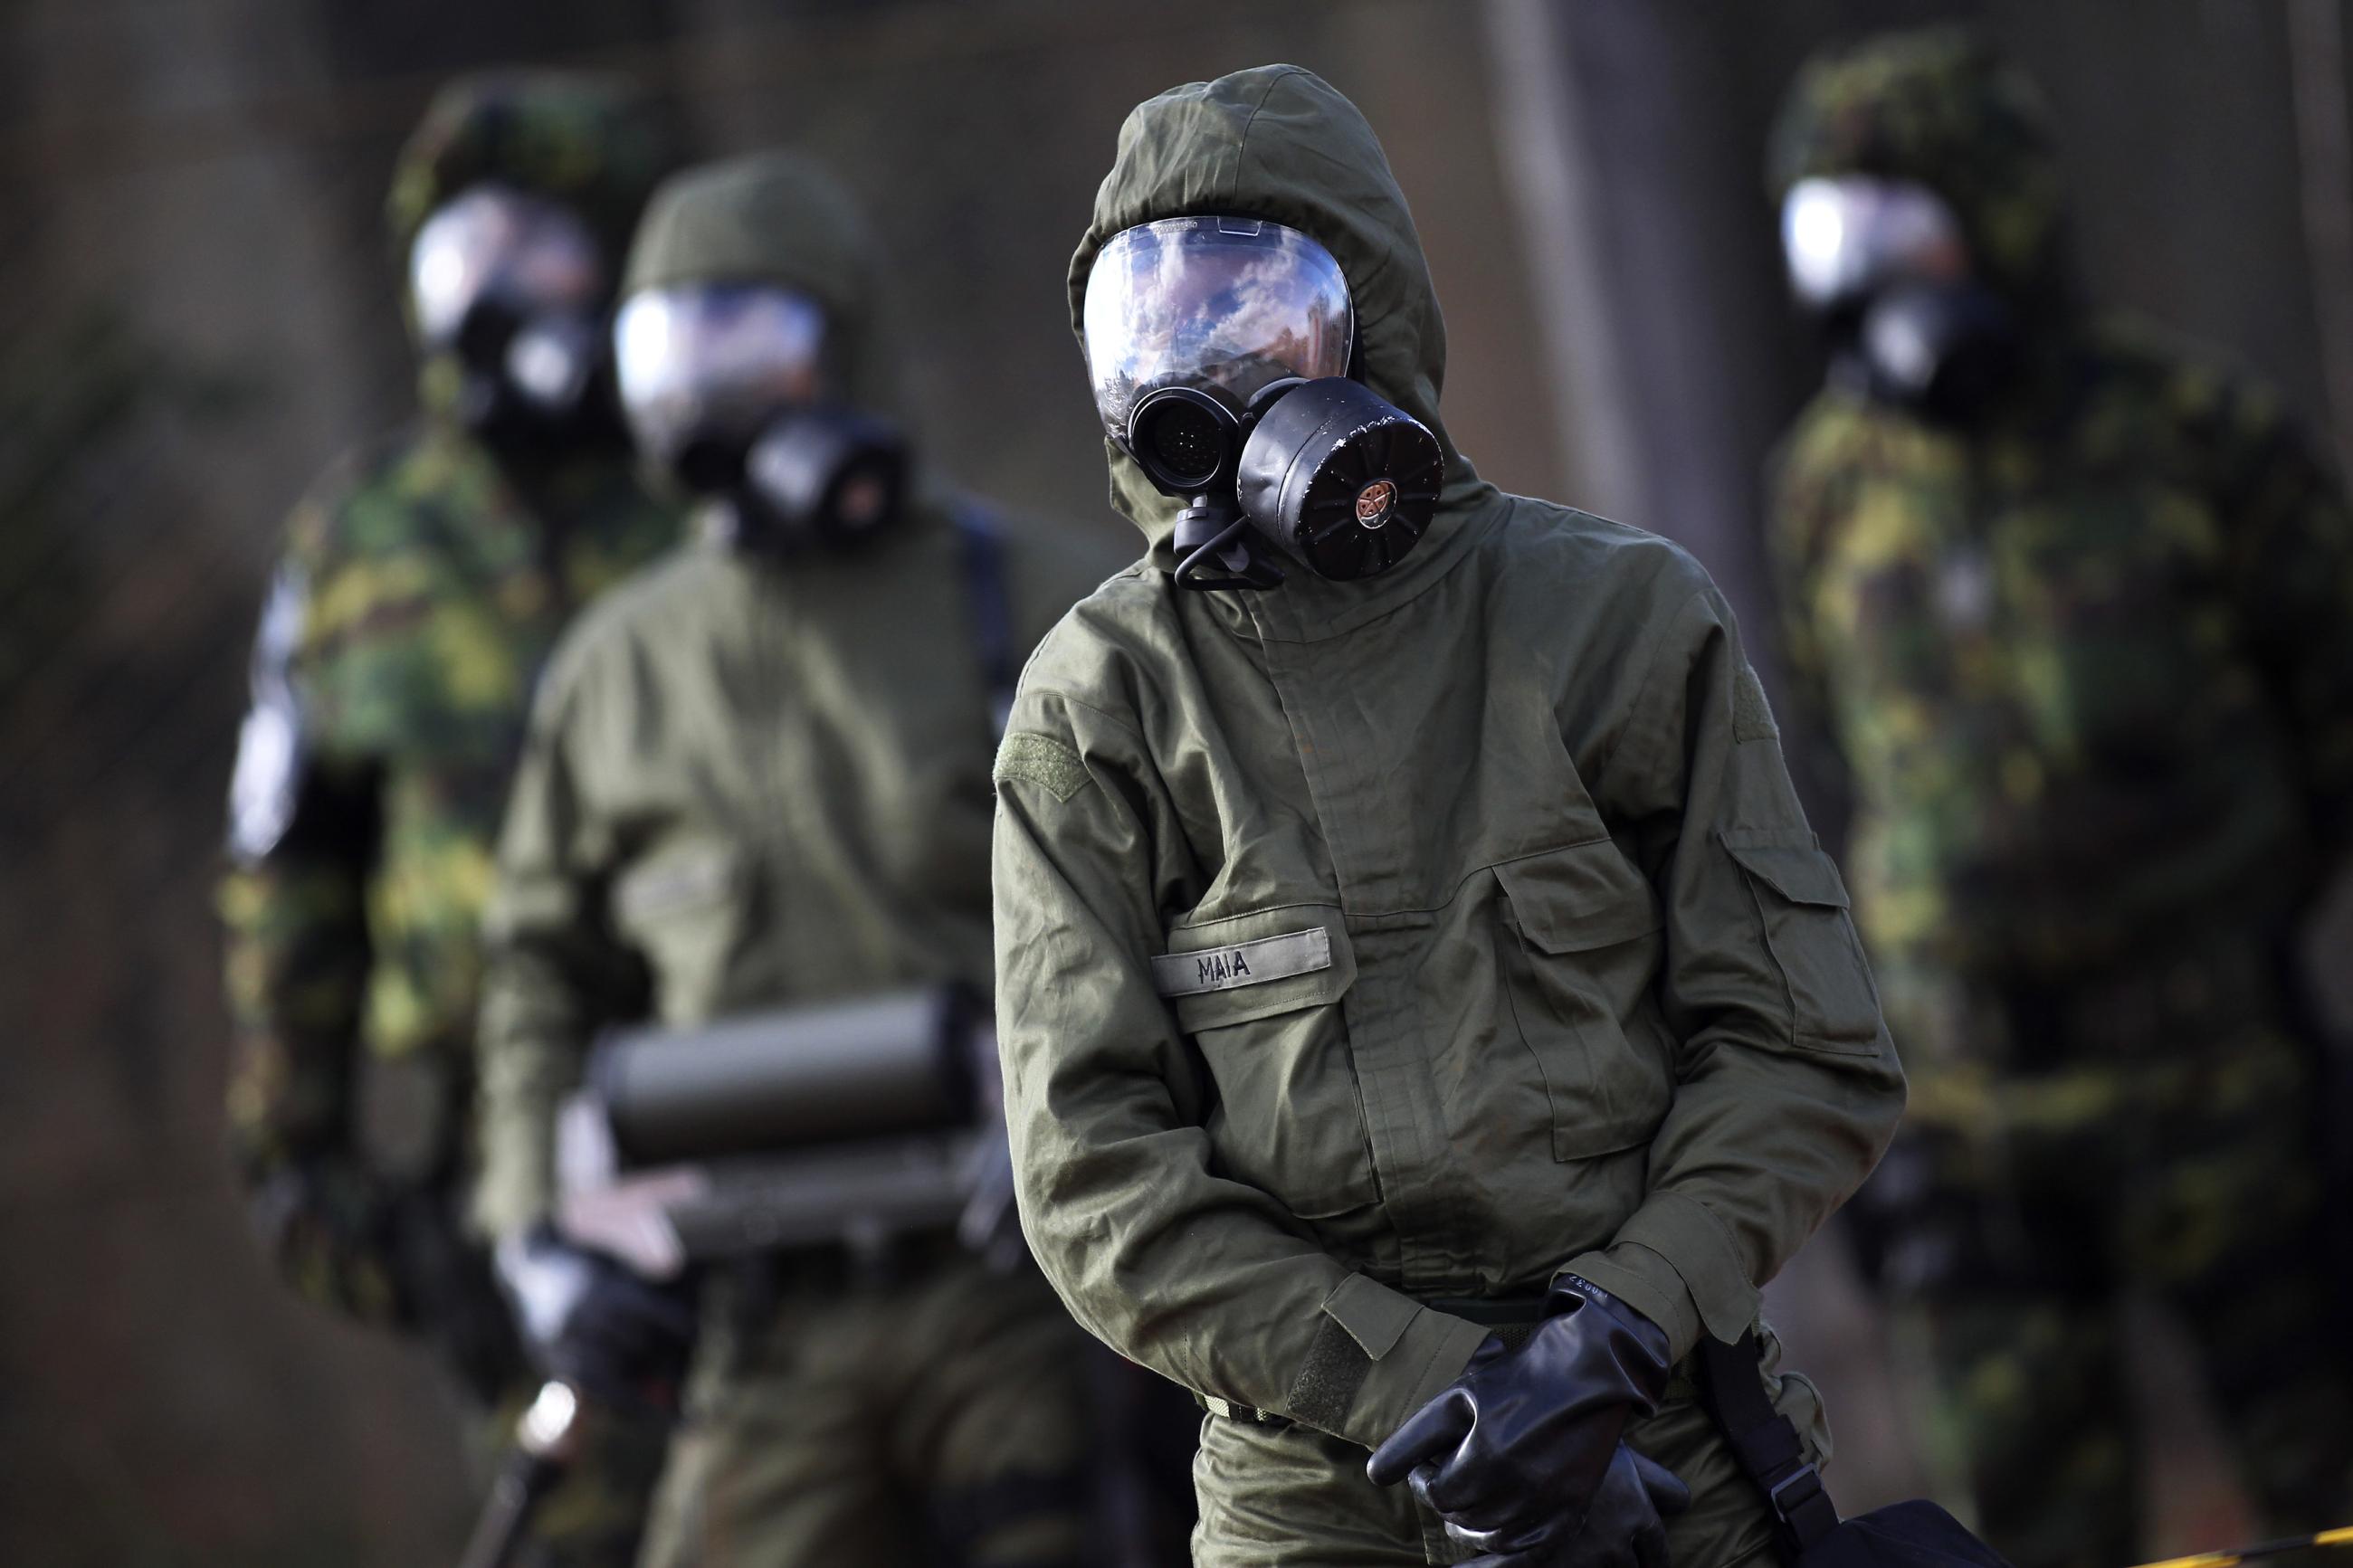 Brazilian army soldiers wear gas masks and chemical suits participate in an anti-terror simulation against chemical, biological, and radiological weapons, near Arena BRB Mané Garrincha, in Brasília, Brazil.